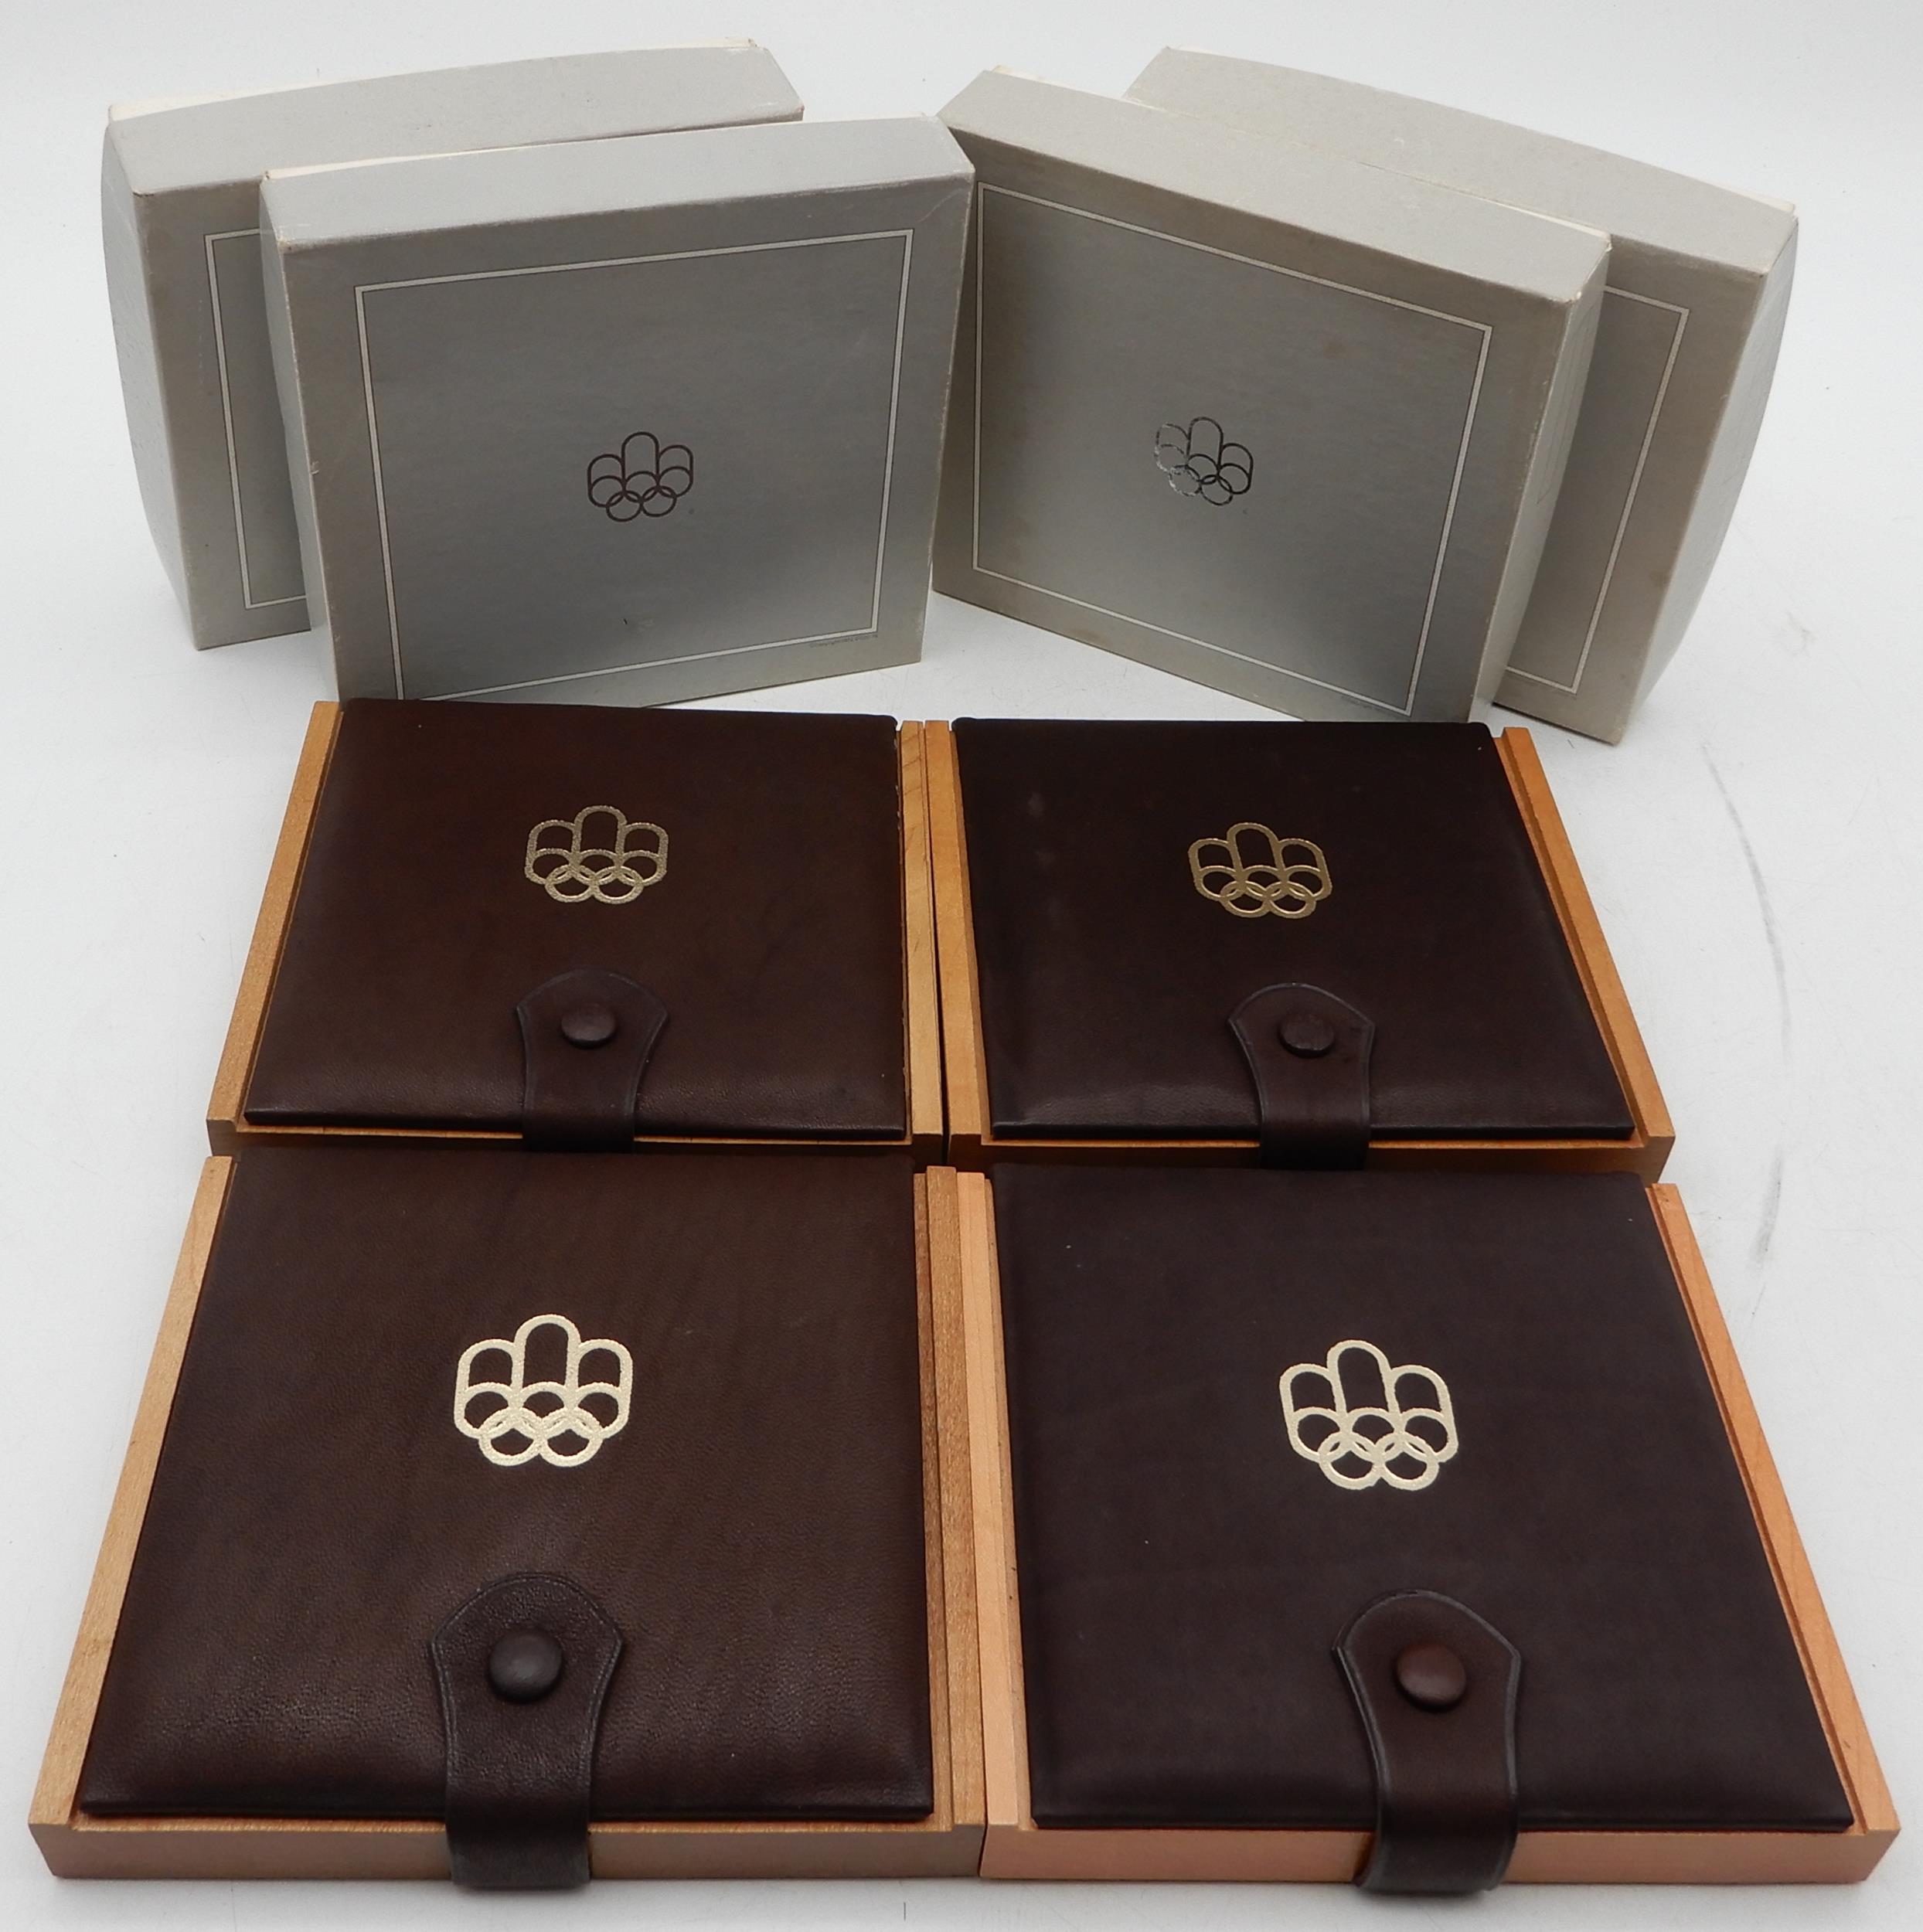 Canada Montreal Olympics 1976 silver four coin proof sets in presentation cases (4) Condition